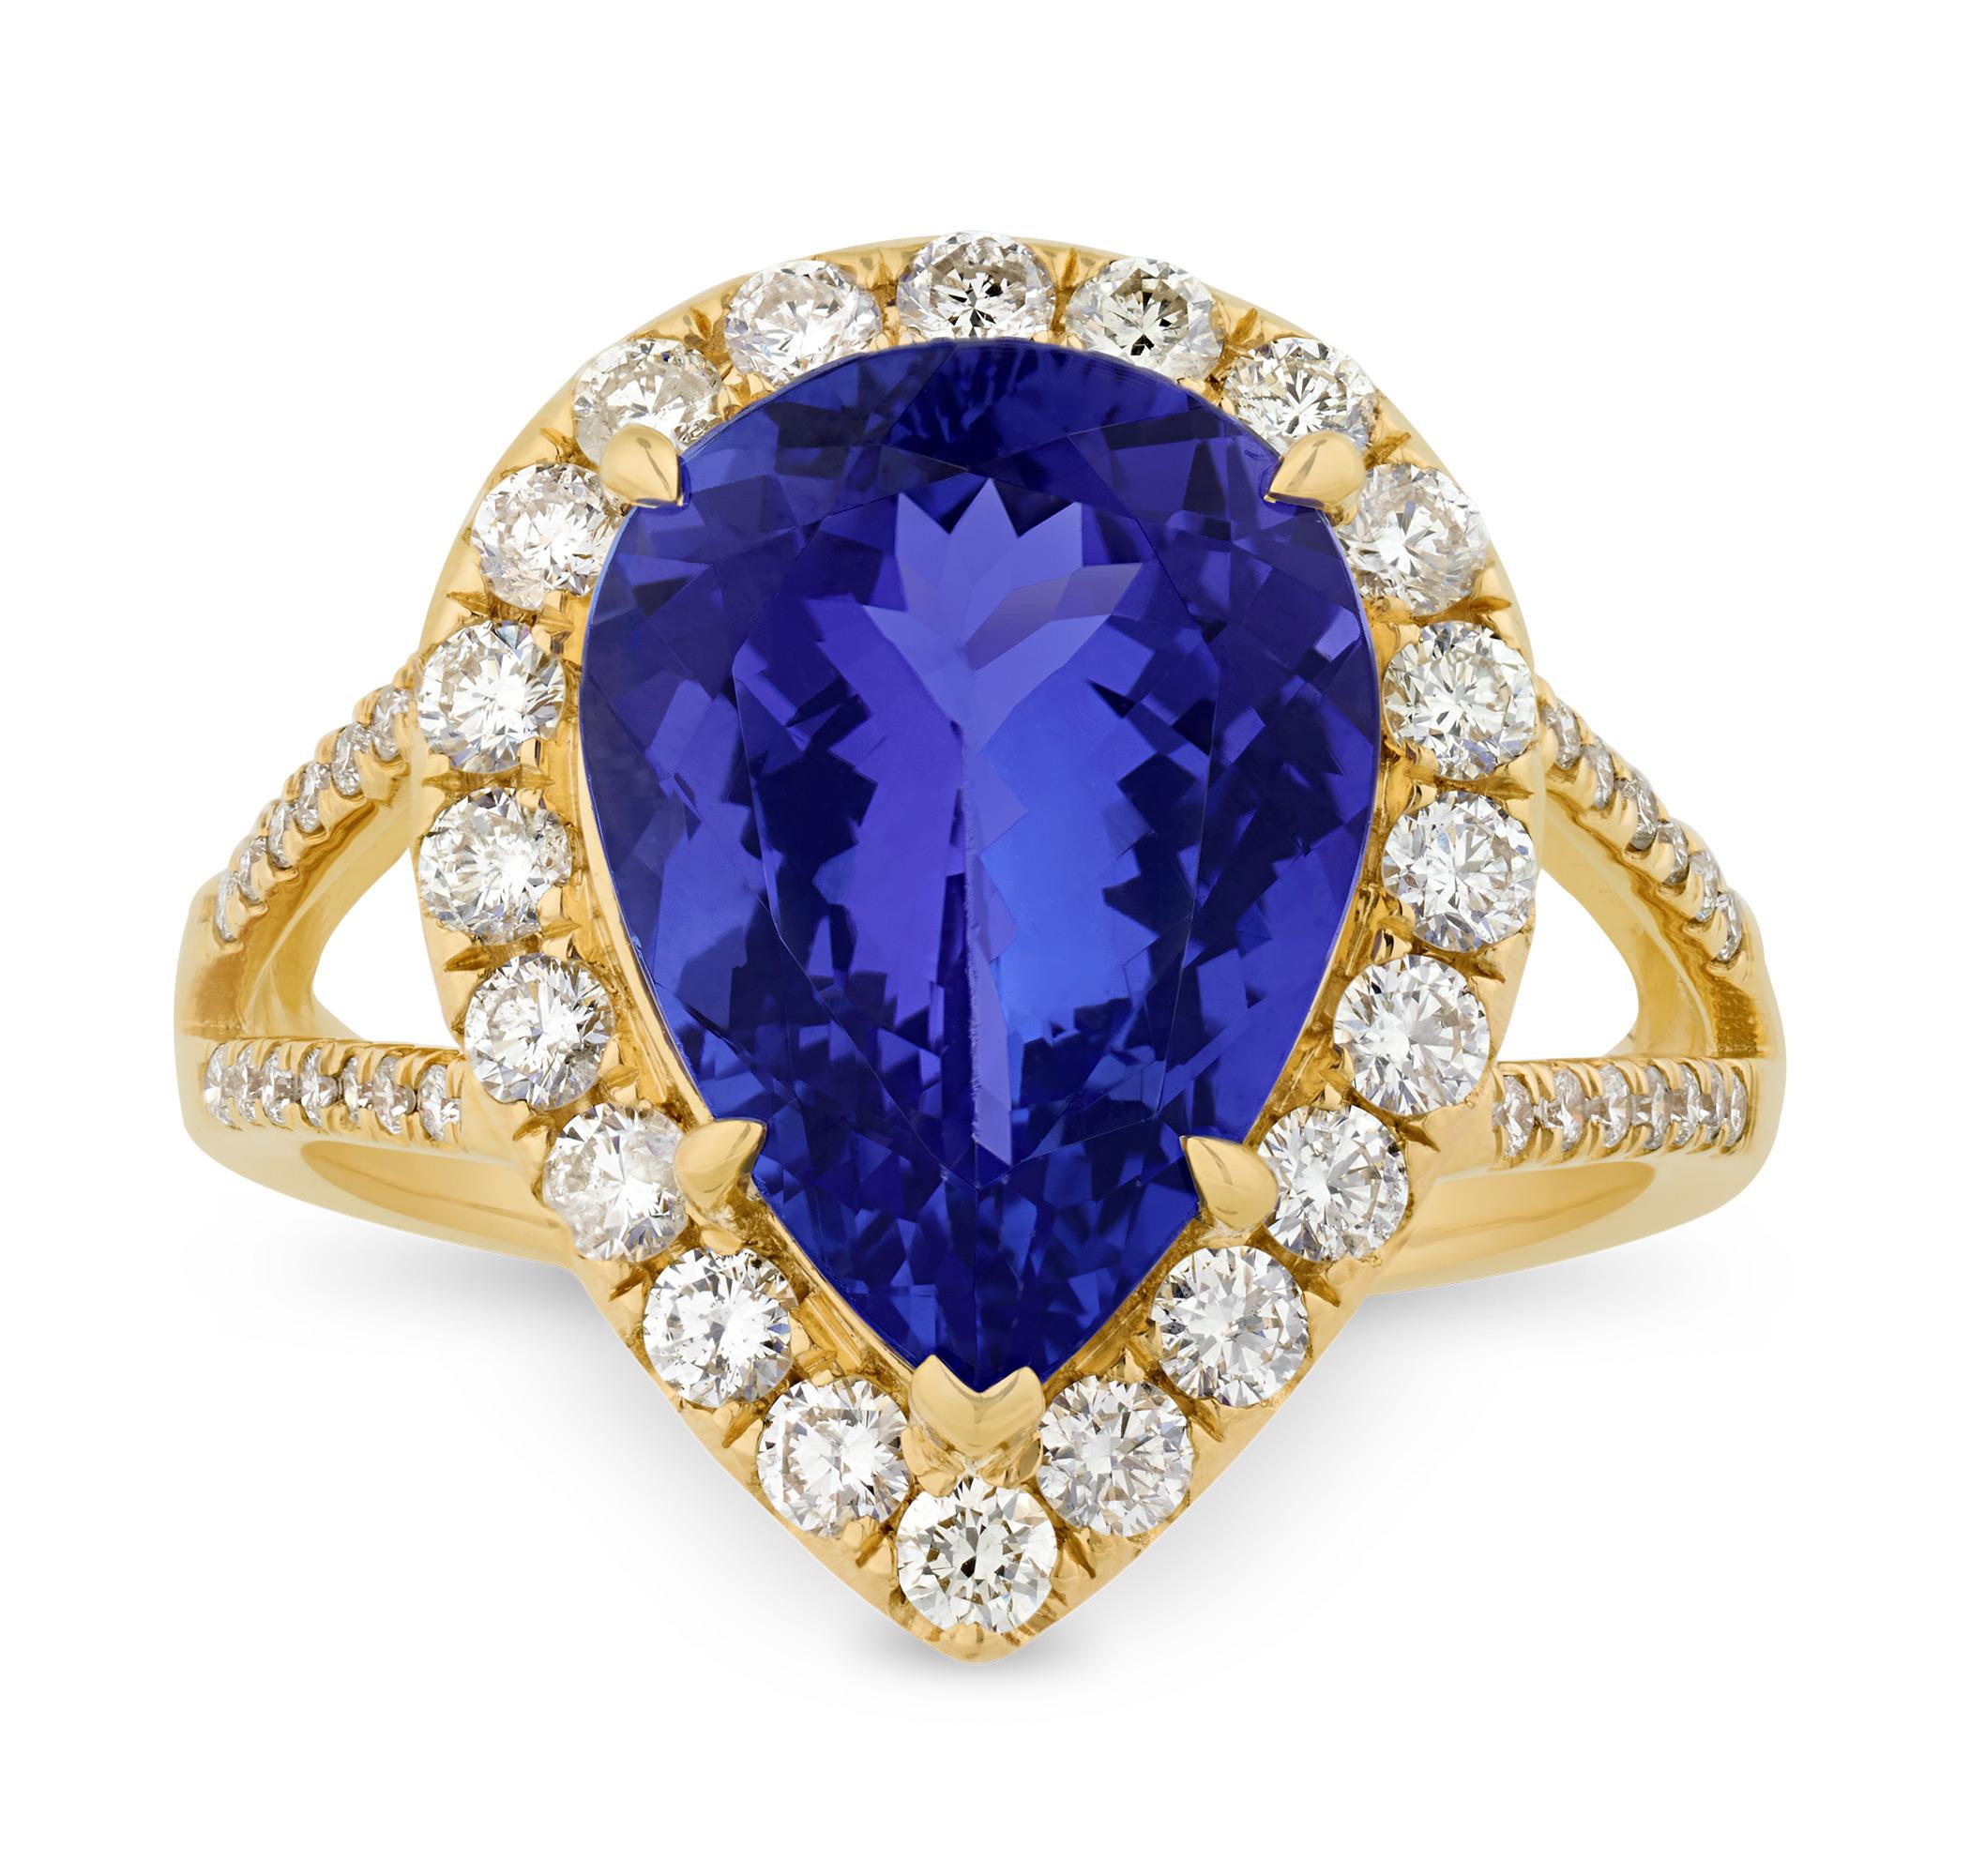 Pear Cut Pear Shaped Tanzanite Ring, 5.53 Carats For Sale